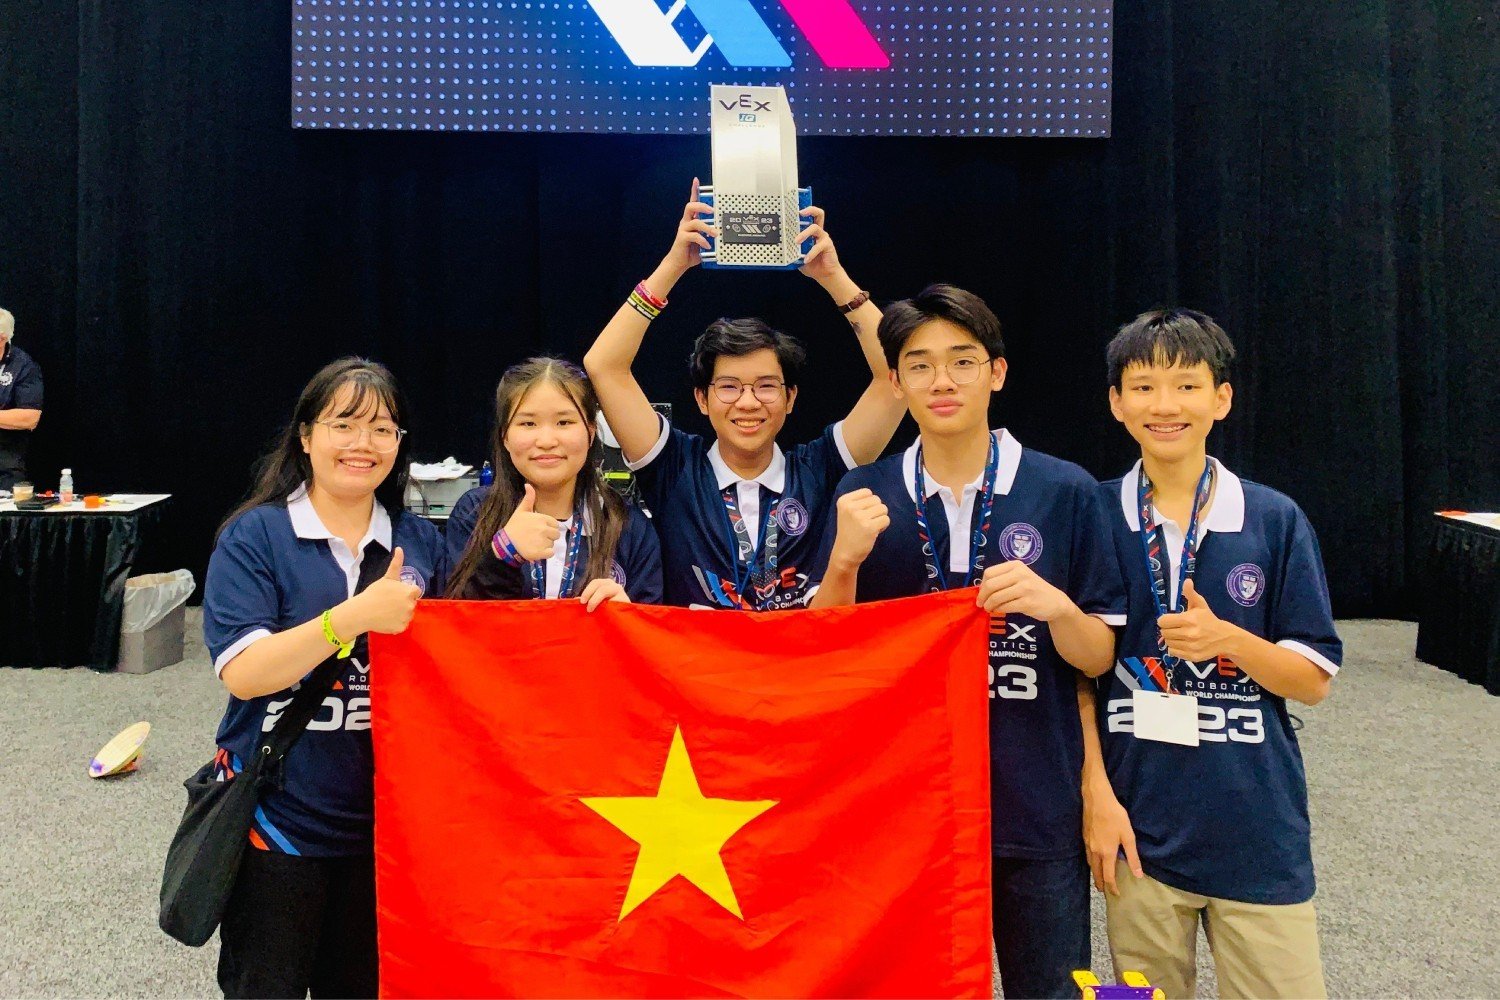 the-penn-chuoi-say-team-and-their-journey-to-conquer-the-vex-robotics-world-championship-2023-in-the-united-states